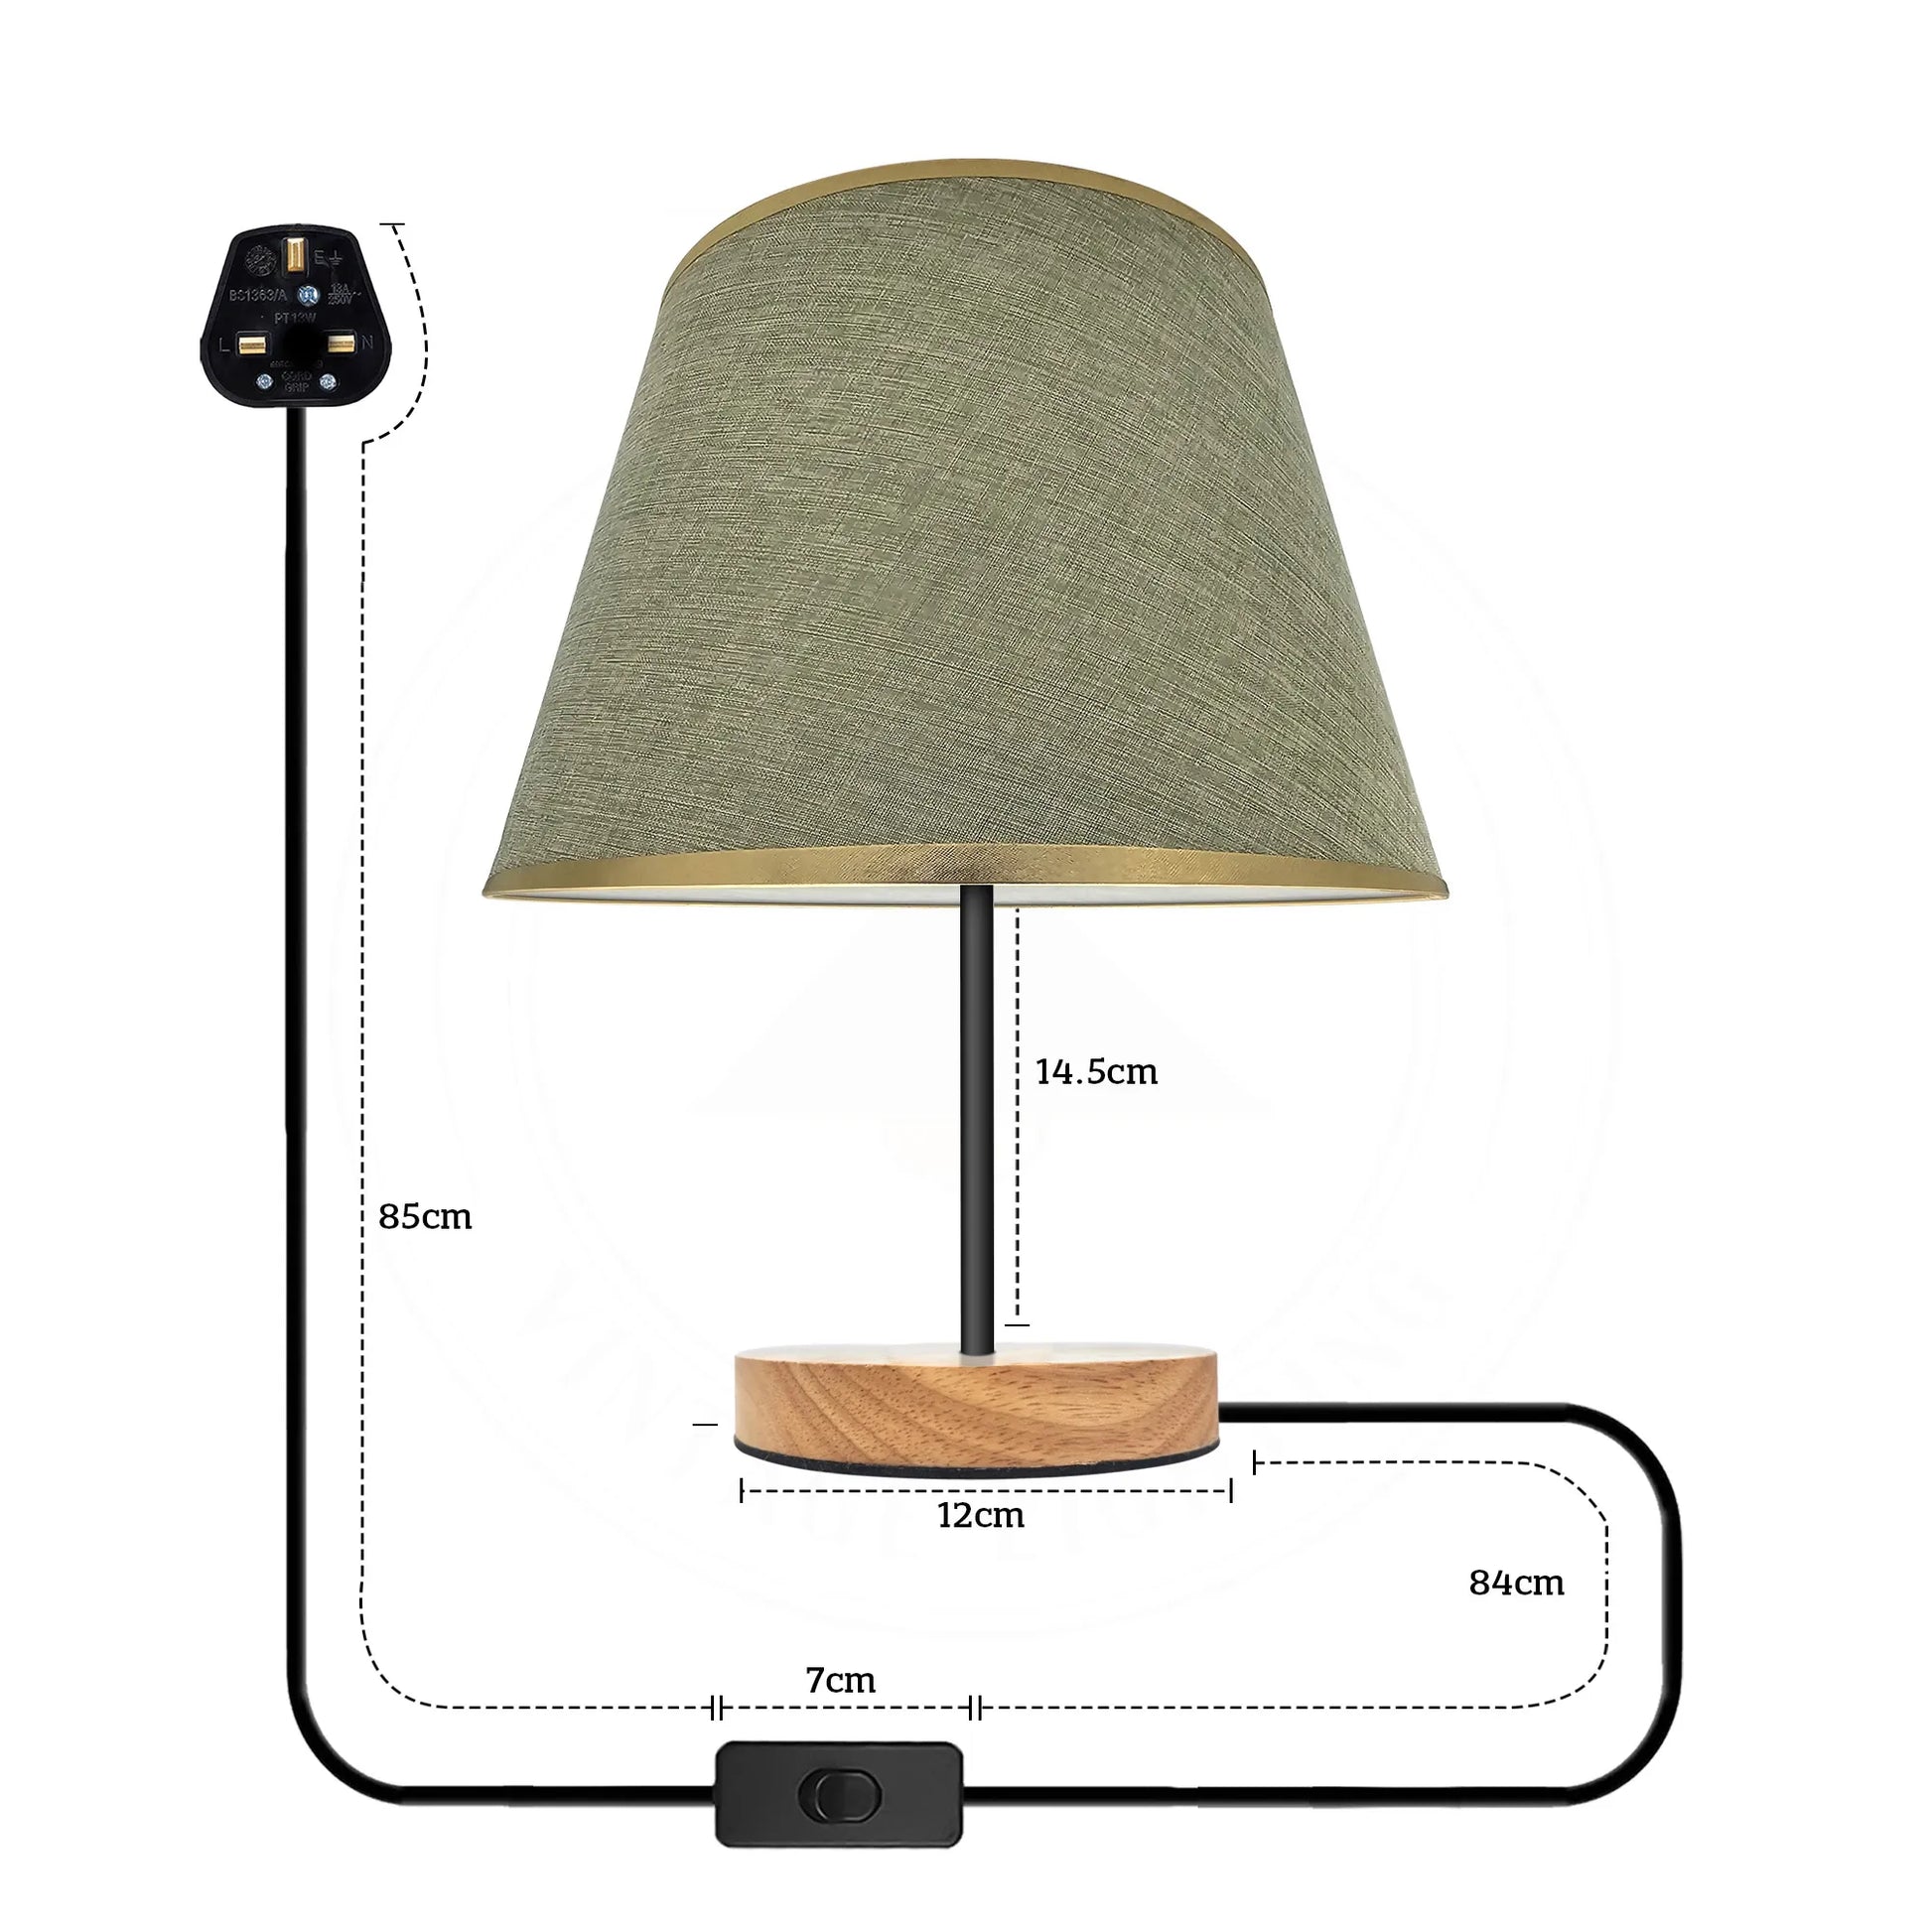 Lampshade plug in Table Lamp Size